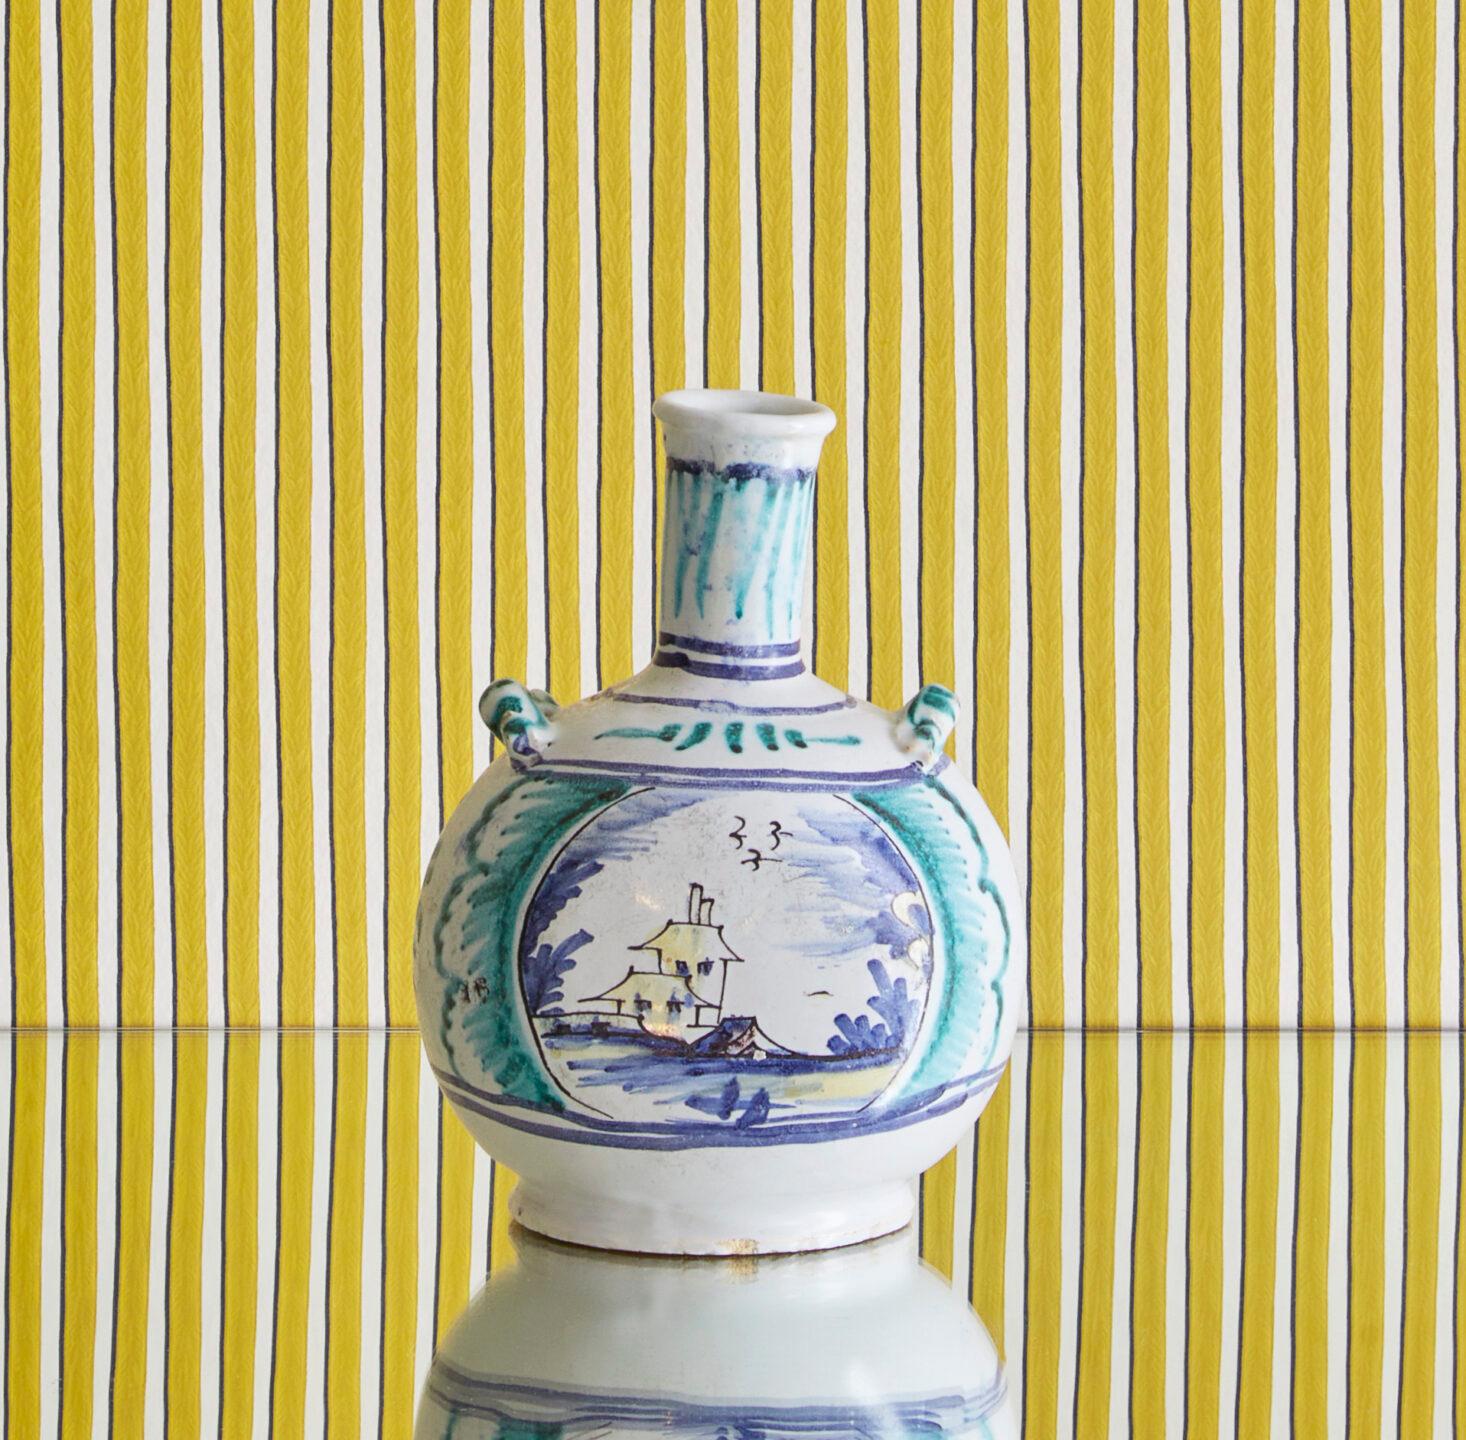 France, 18th Century

Ceramic bottle vase, painted in blue and green. 

Measures: H 13 x Ø 13 cm.